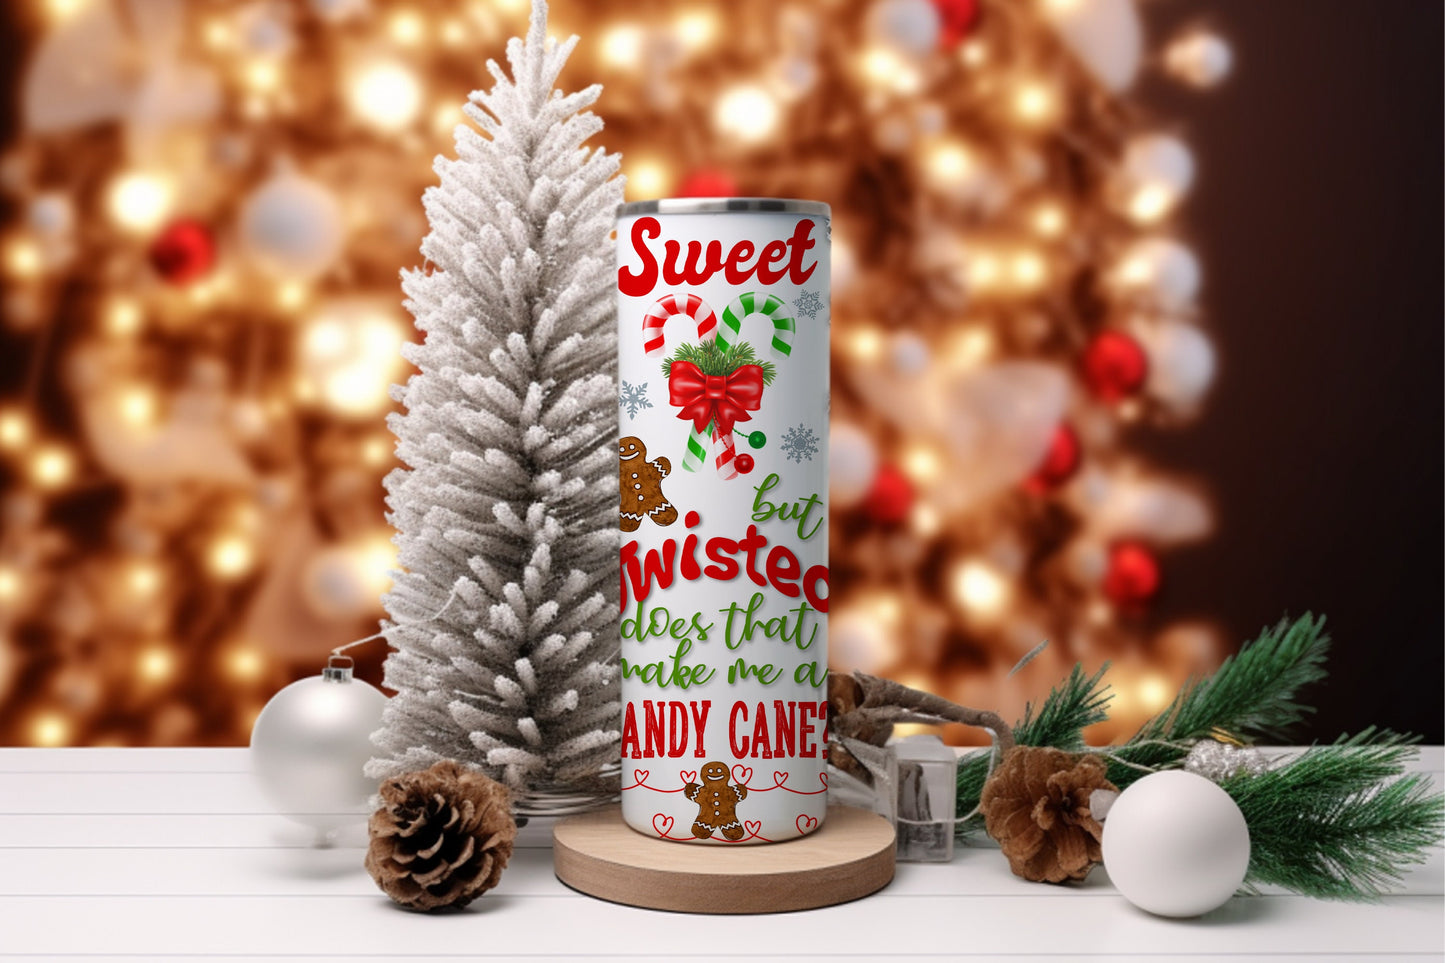 Sweet But Twisted Does That Make Me A Candy Cane? - 20oz Skinny Tumbler - Fun Holiday Quote, Christmas Candy, Festive Drinkware